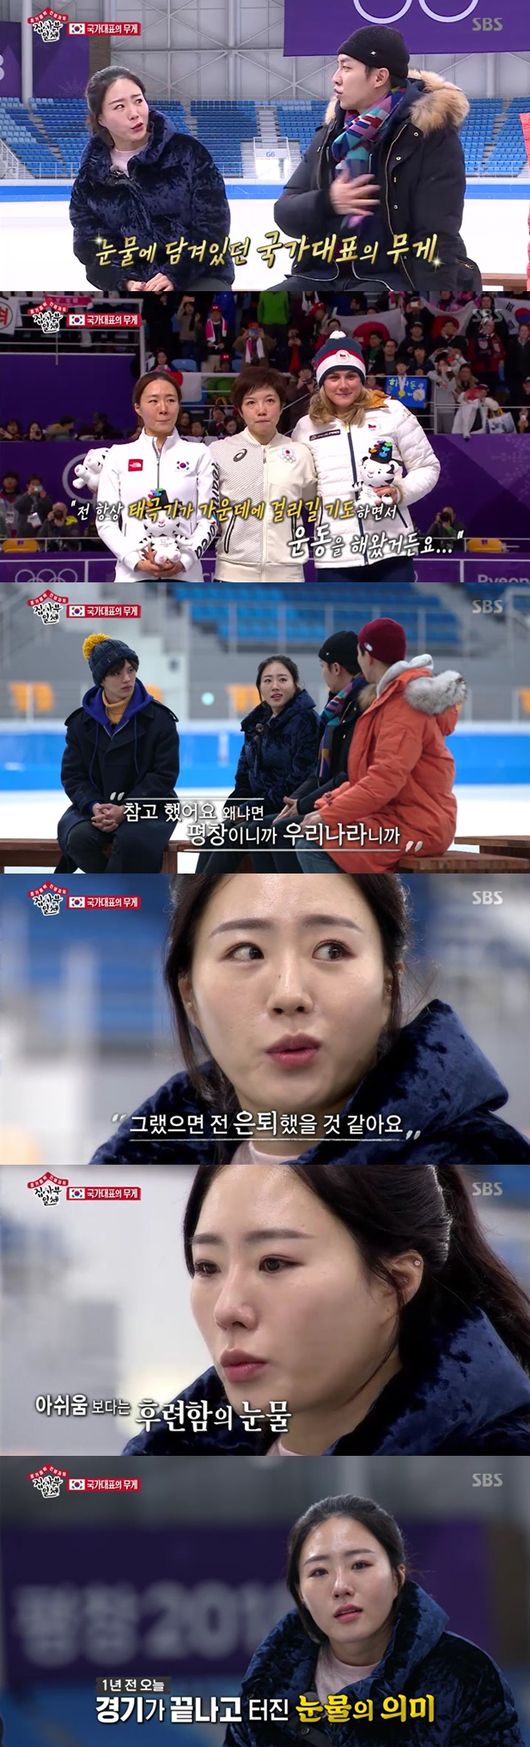 Lee Sang-hwa delivered the weight of the national team by breaking down tears after the first feat of the Pyeongchang Olympic video a year ago.Lee Sang-hwa, the master of SBS entertainment All The Butlers broadcast on the 17th, was drawn.Lee Sang-hwa, an ice-skating lady, appeared as a master. A year ago, to recall the day before Kyonggi, Lee Sang-hwa headed to the hostel where he visited directly near Kyonggi.There is no free admonition was noticeable, and Yook Sungjae said, I feel like getting a warm room after training in a cold place.Lee Sang-hwa pulled out the cereal with a prepared meal, which turned out to be because before Kyonggi he didnt eat anything to keep his light body.Like Lee Sang-hwa, the members shared the cereal just like the day a year ago, but all the food they had gained after the hardships were cherished in the meal.From training to eating, Kyonggi showed it as it was before. Lee Seung-gi wondered, Is not eating rice energy?Lee Sang-hwa said, The Gangneung Link is light, so I have to go out well, and I have to tough myself out of it. He said, I want to play a perfect race before the Olympic Kyonggi.Lee Sang-hwa said, I felt that my mental strength should be strong. He mentioned the acquisition of ice water in the middle of winter by the Taeungung Jeontung training method for armed forces.Lee Sang-hwa proposed a thigh wrestle as a winner-selected game.Lee Sang-hwa, a national treasure-grade gold-buck, said he had never tried to wrestle his thighs.Lee Sang-hwa came out of the match from Yang Se-hyeong first, and Lee Sang-hwa came out with confidence, saying, Ill just win.Yang Se-hyeong had 5.5 seconds ahead of expectations, and Lee Sang-hwa was embarrassed by the unexpected propaganda; next was Yook Sungjae.At the same time as he started, he was defeated, 1.64 seconds. Yook Sungjae laughed at himself saying its a lower body garbage.Lee Seung-gi then appeared spleen as a top model and a specialist, with 4.71 seconds; Lee Sang-hwa also admitted that he was strong.The last runner Lee Sang-yoon stopped the confrontation with a sense of Top Model, Lee Sang-hwa the strongest, and 1.64 seconds passed.Sungjae said, I will do Top Model again when my master is out of power. However, I renewed the new record of 0.74 and laughed.Eventually, Yook Sungjae won the valley water. He said he had to keep his poker face after entering cold training.Yook Sungjae showed off his feet as well as ice water washing, and he was seen as a man. At this time, Lee Sang-hwa was given a goggle sign gift worn at the Olympics.Lee Seung-gi, Lee Sang-yoon, and Yang Se-hyeong played a sudden confrontation with Lee Sang-hwas treasure on the spot.With all available, all kept pokerface.However, Lee Seung-gi and Yang Se-hyeong, who were confident, gave up, and Yook Sungjae and Lee Sang-yoon were not in the process.Two people who played like a stone buster, but Lee Sang-yoon gave up.Yook Sungjae said, I believed in the words that my master said, Thinking depends.This is a poker face psychological warfare, it is also mental power, everyone admired.Next came the day of the PyeongChang Olympics D-day, a year ago.Lee Sang-hwa said, On the day I waited for four years, I thought I could come back laughing and laugh after Kyonggi. He headed to the Kyonggi chapter, which was the place of the four-year effort.Its my first time in a year, said Lee Sang-hwa, who had a special feeling: I kept my poker face but there was extreme tension.Lee Sang-hwa recalled that he had to carry the weight of the shout from the locker room, saying, I heard a shout from above.Then he headed to the Kyonggi. The national team had the weight of the shouts to carry. Then he felt the feeling and emotion again.Lee Sang-hwa said, It is still vivid, I think I have returned to the Olympic day.A year later, today, with the tension that I can see the video, Lee Sang-hwa, who has courage, decided to play I will see and play it himself.I felt the trembling of that time a year ago, but Lee Sang-hwa, who was first faced with the video a year ago, had disappeared.Then, when I saw the expression of my parents in the first relay screen, I finally blurred my tears.Lee Sang-hwa said, It was really hard at this time. The tears that had been pressed on my parents faces burst.Lee Sang-hwa said, I mentioned it, it is Pyeongchang, it is our country, and said that it was a homework to overcome the injury.Lee Sang-hwa said, I have always been exercising in the hope that the Taegeukgi will be caught in the middle, and it is the Olympic Games of our country that had an extraordinary meaning.All The Butlers broadcast screen capture